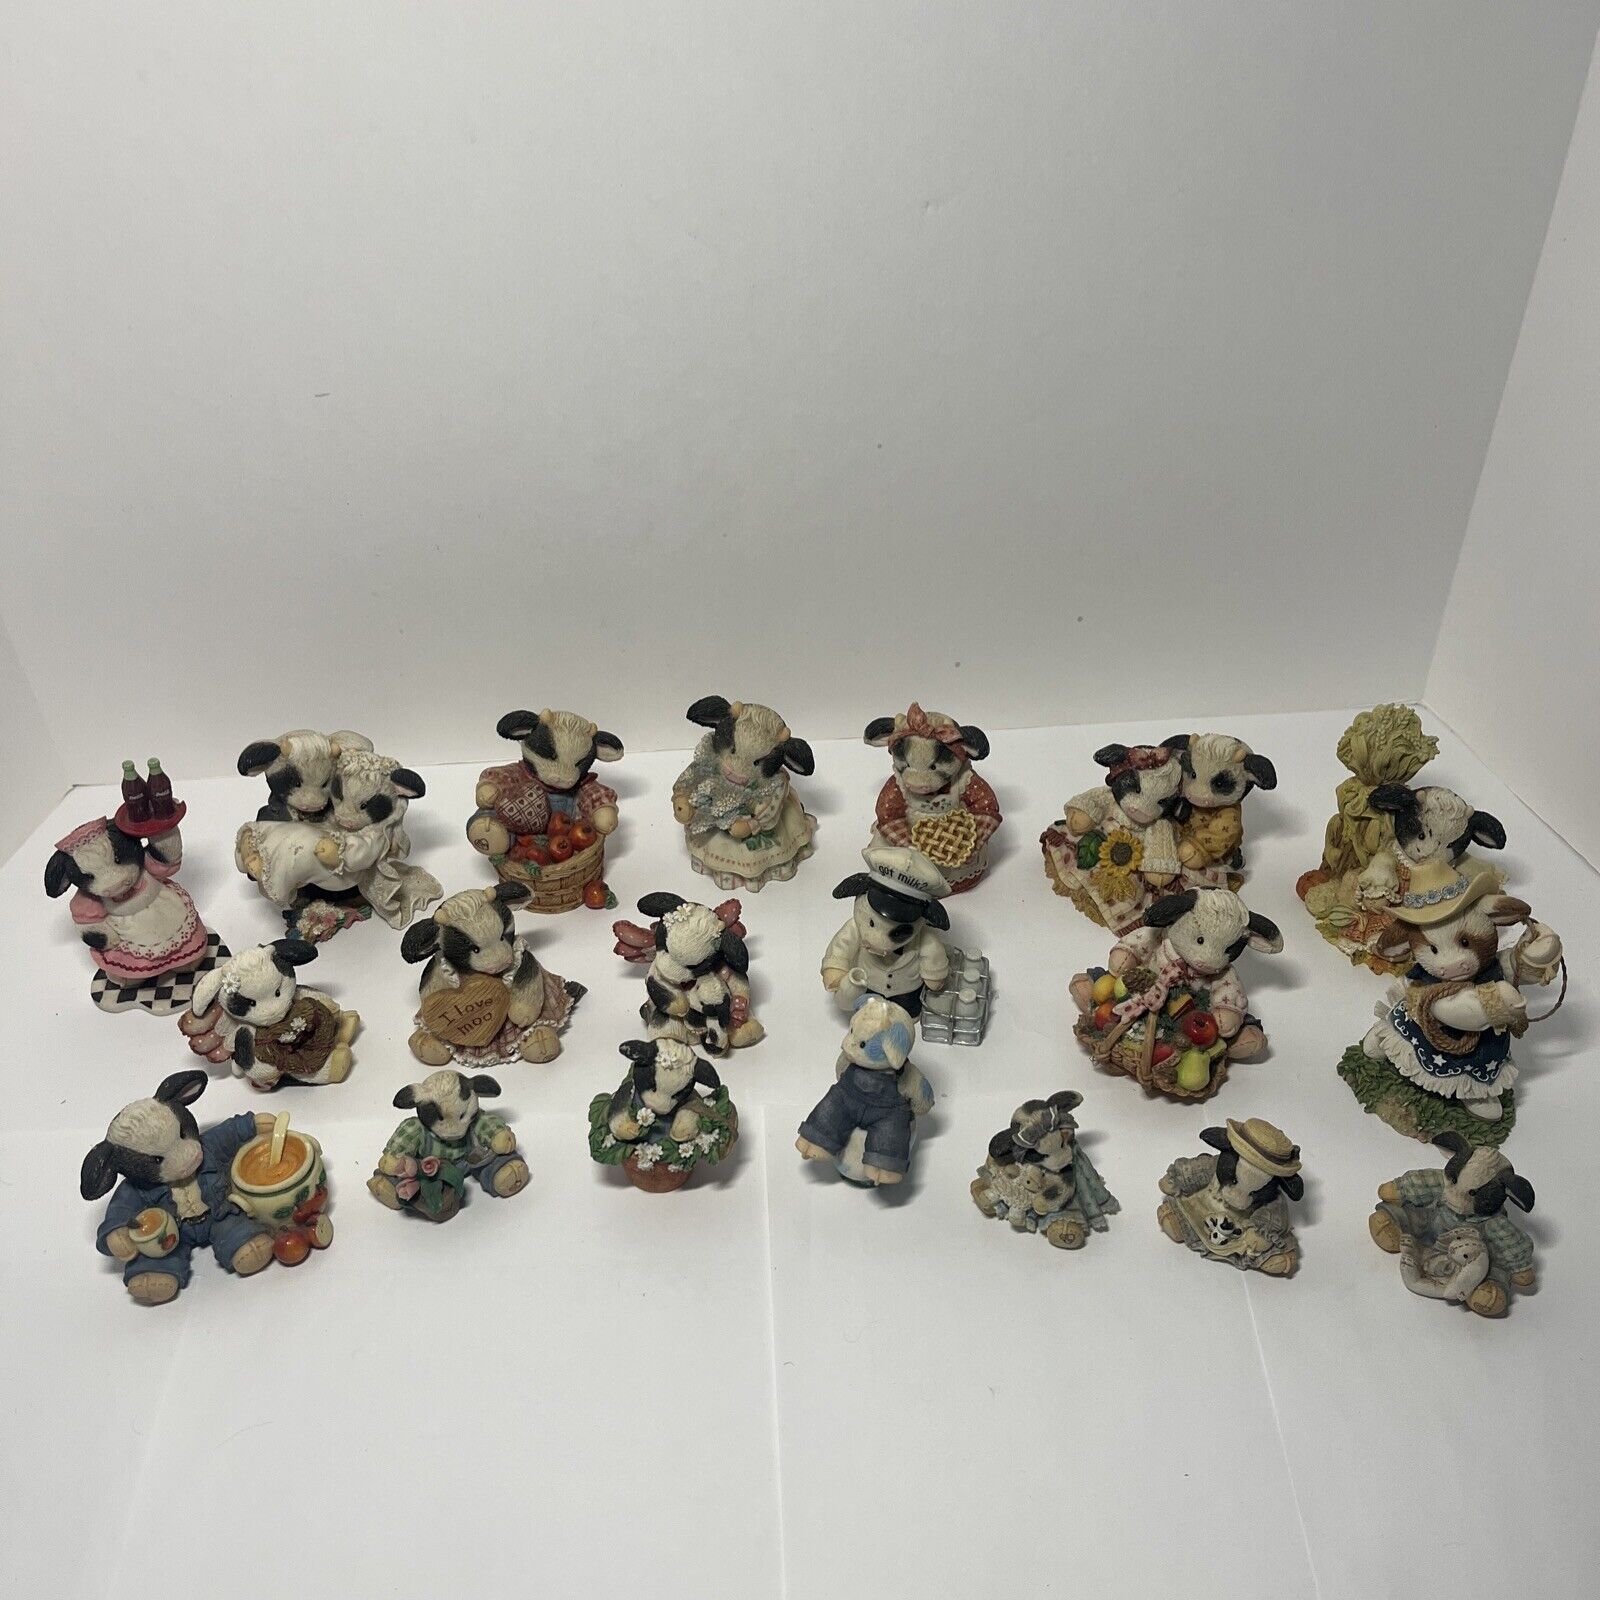 Vintage Enesco Mary's Moo Moos Collectible Figurines Lot of 20 1994-2003